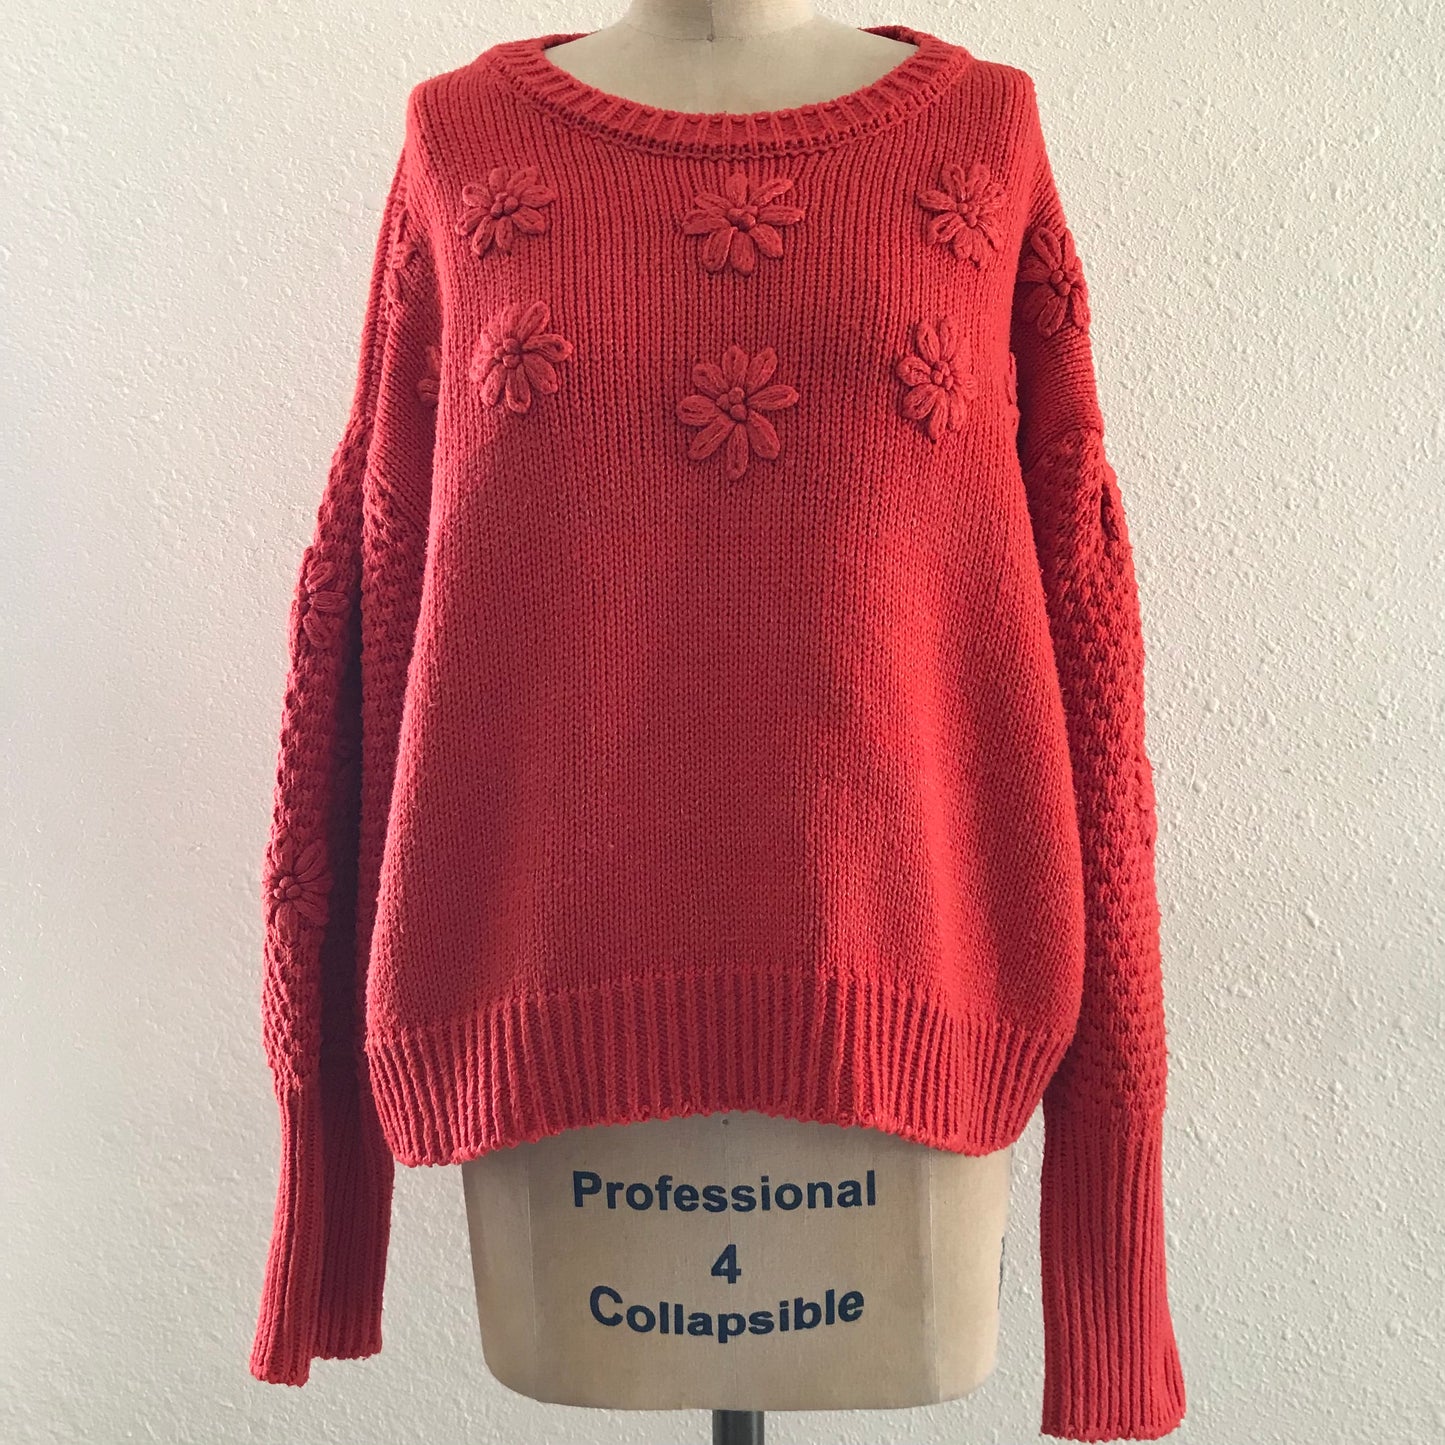 Anthropologie Orange Chunky Knit Embroidered Sweater